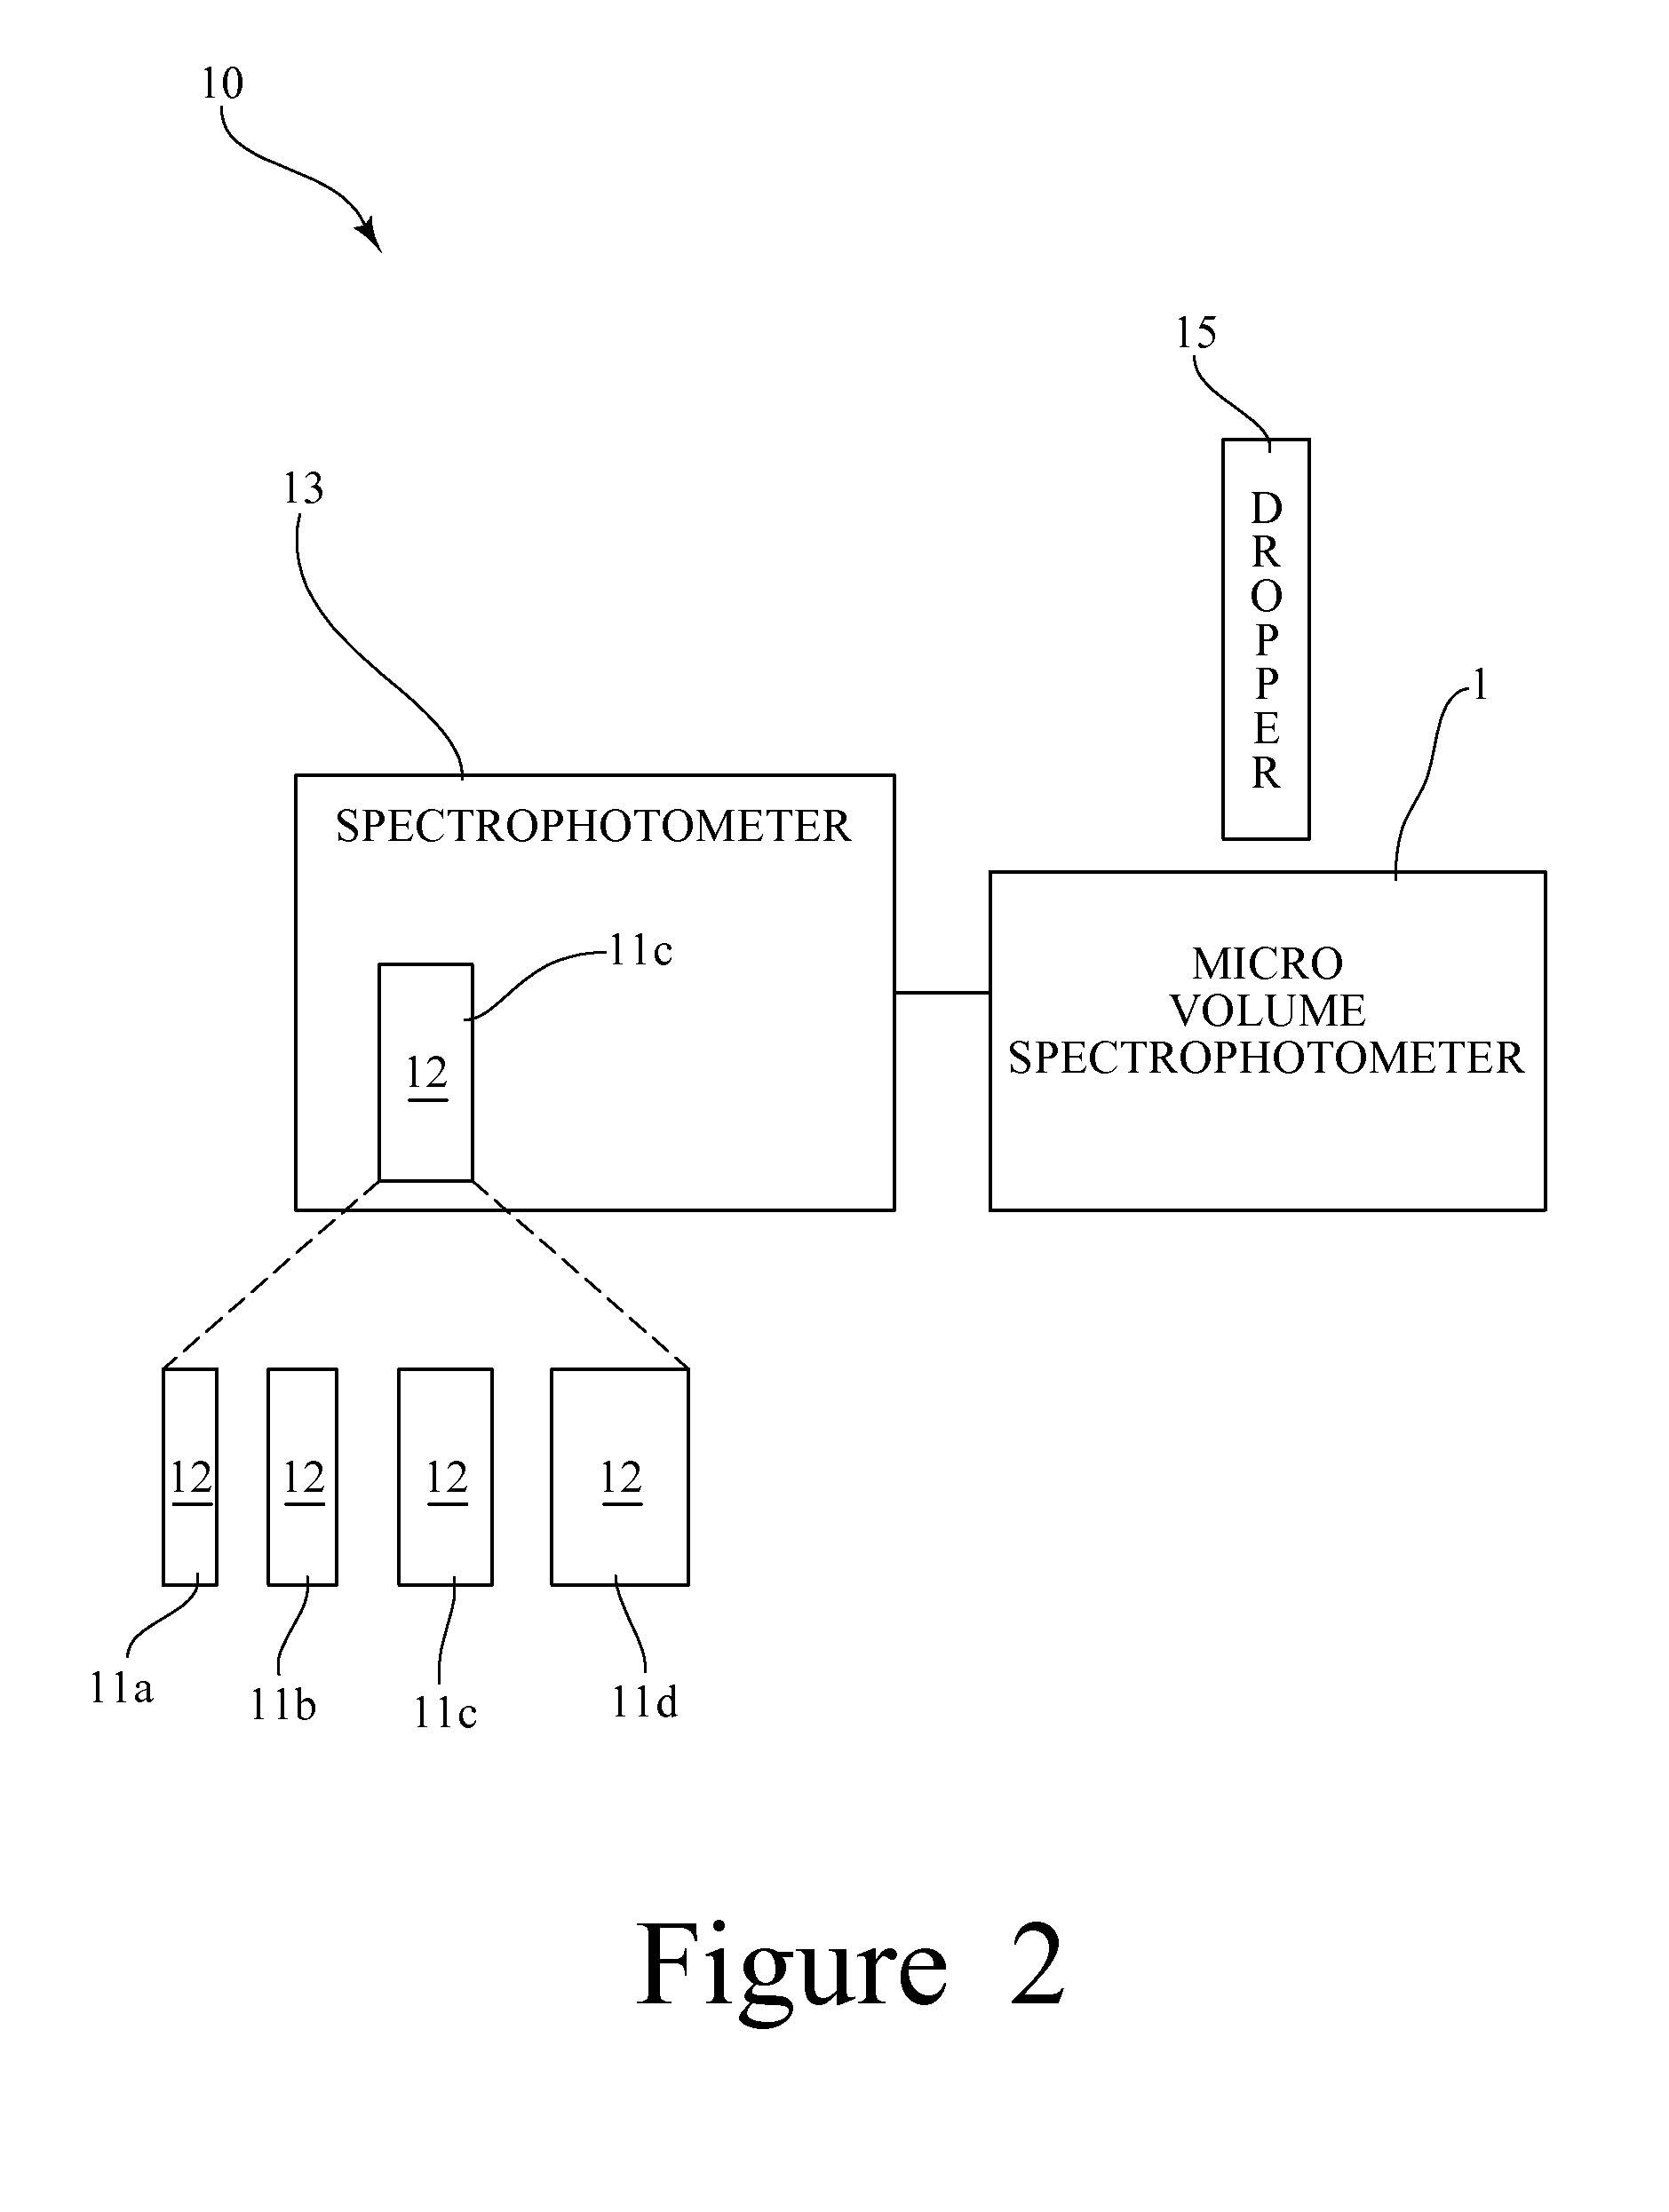 Method for determining the path length of a sample and validating the measurement obtained